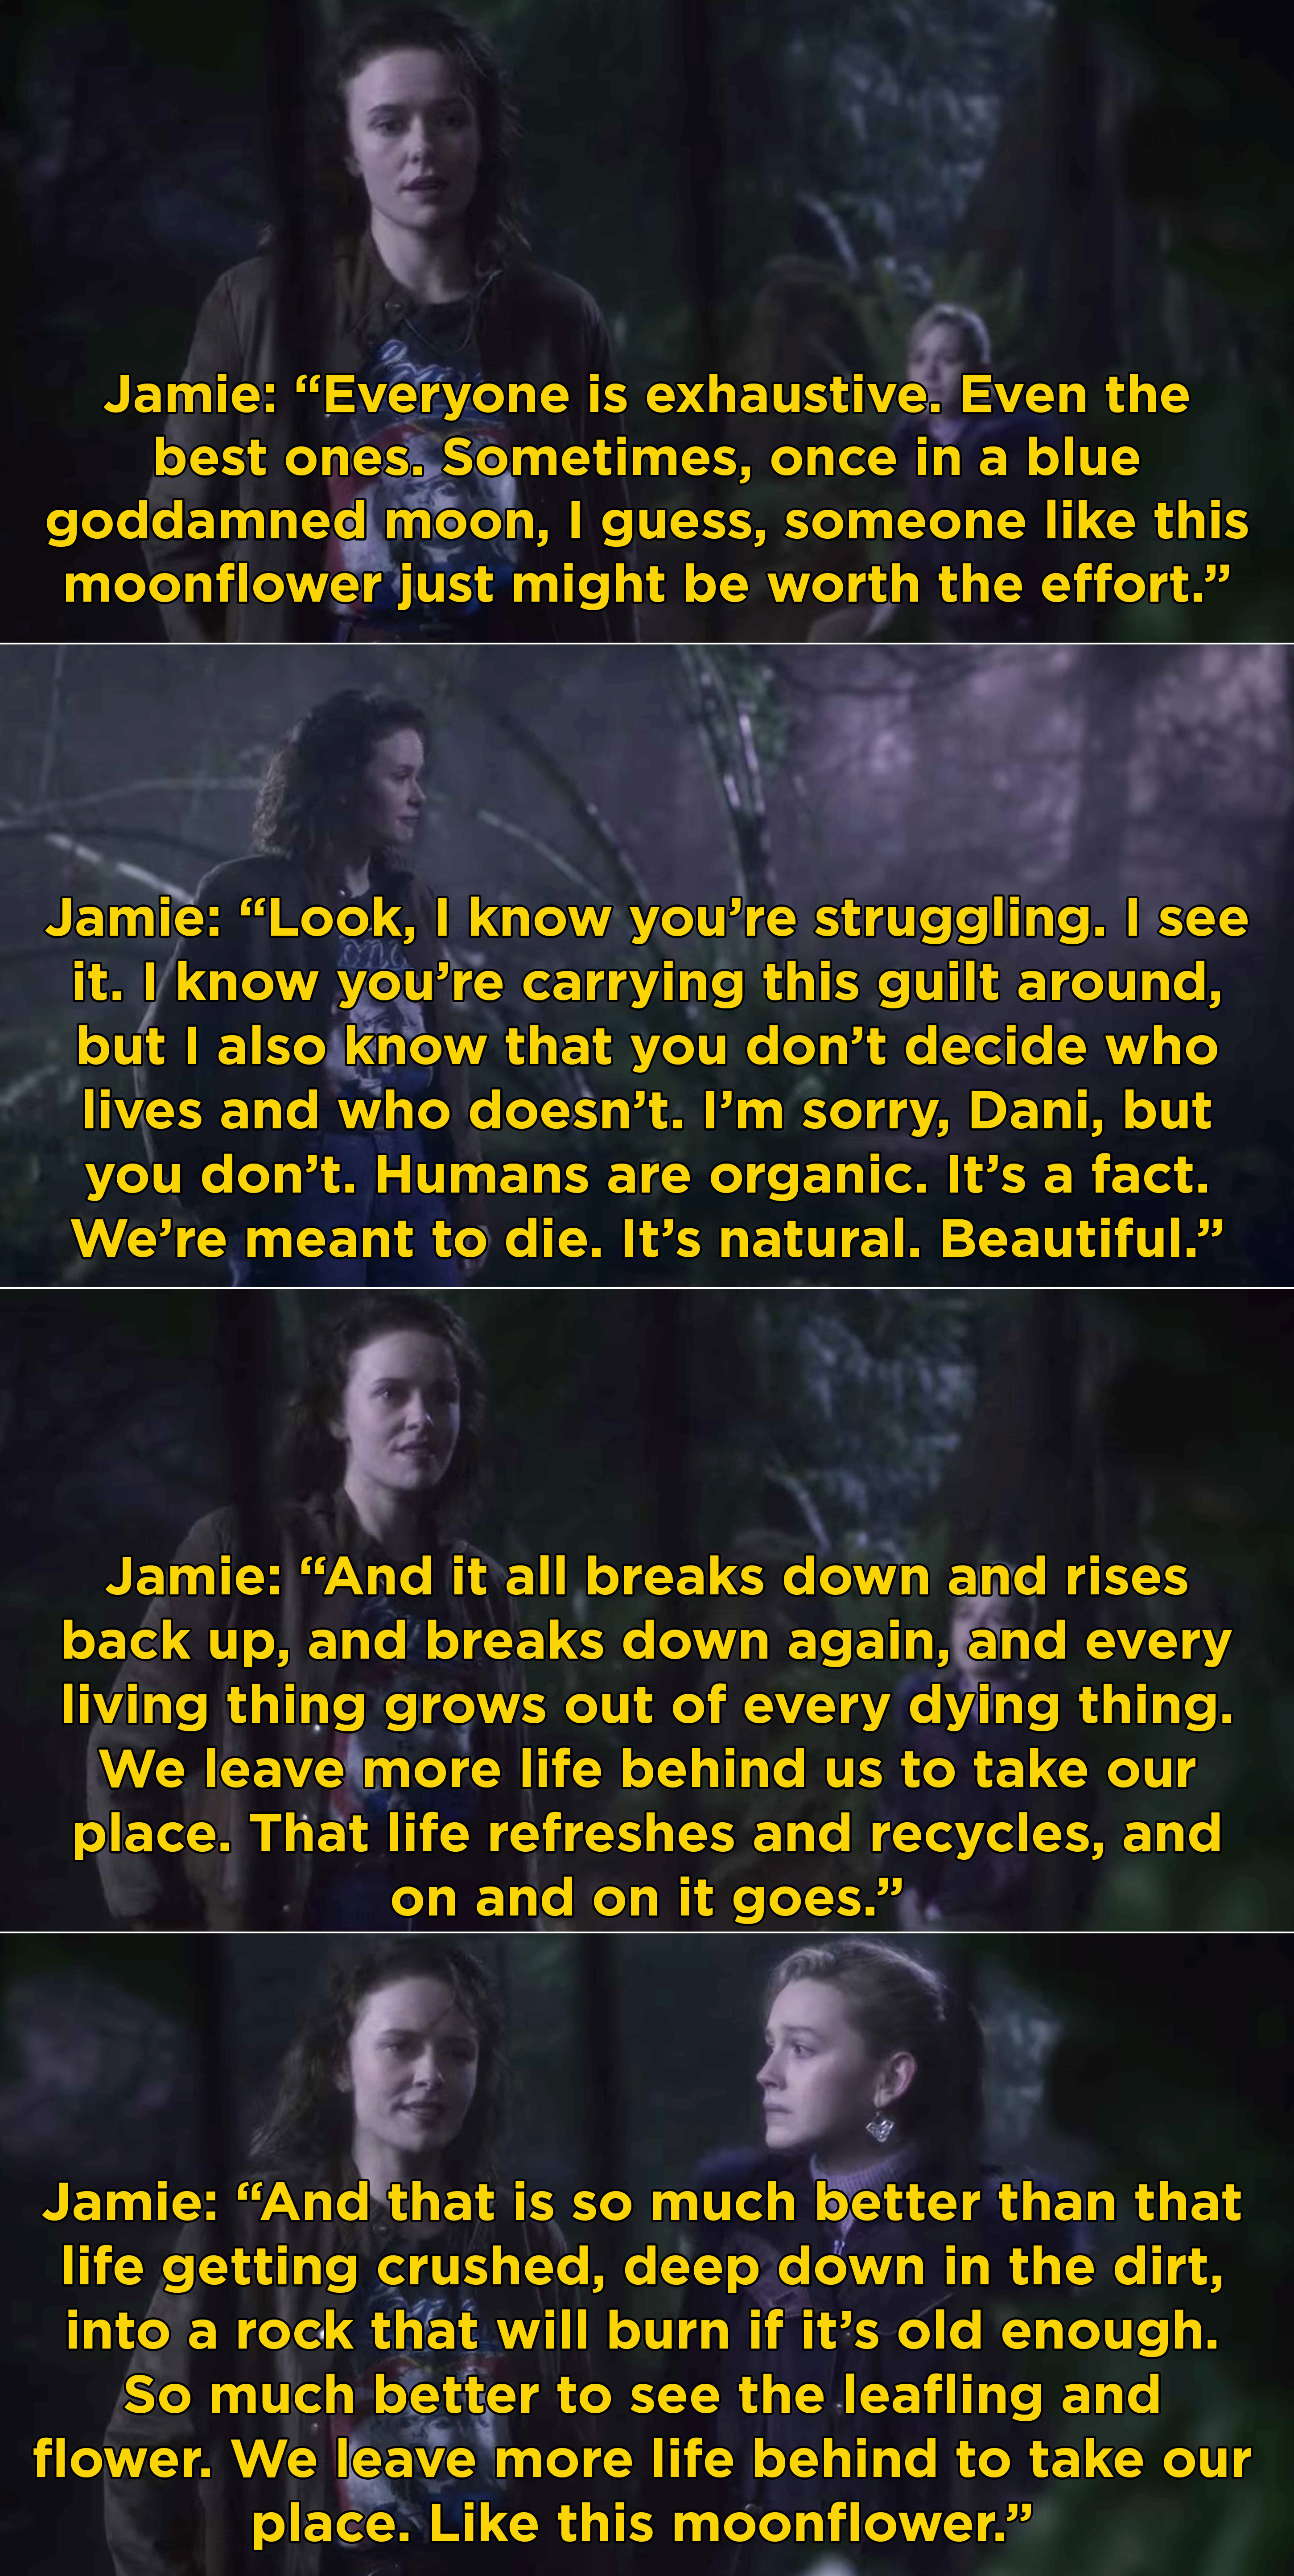 Jamie explaining how people are like plants and sometimes someone, like a moonflower, are worth the extra effort